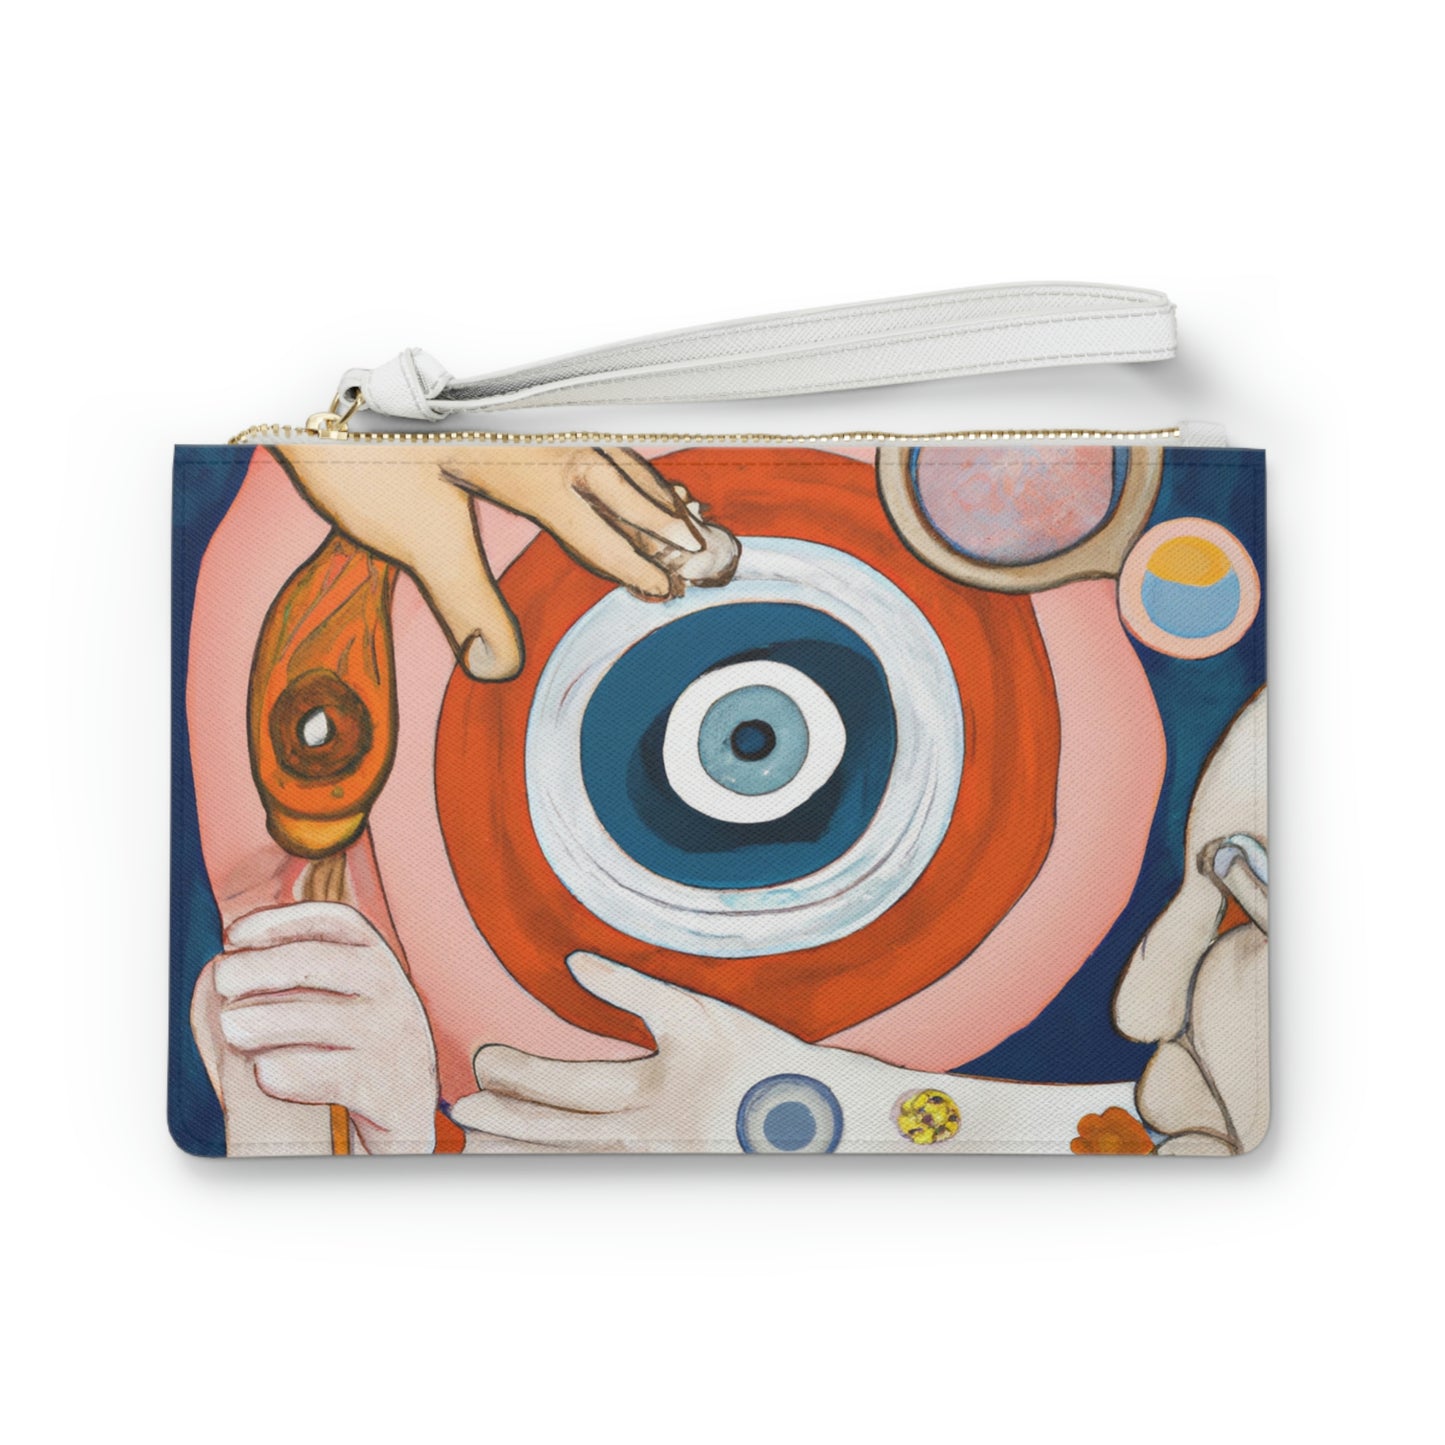 takes them on an adventure

A Twist of Magic: An Elderly Person's Unexpected Journey - The Alien Clutch Bag